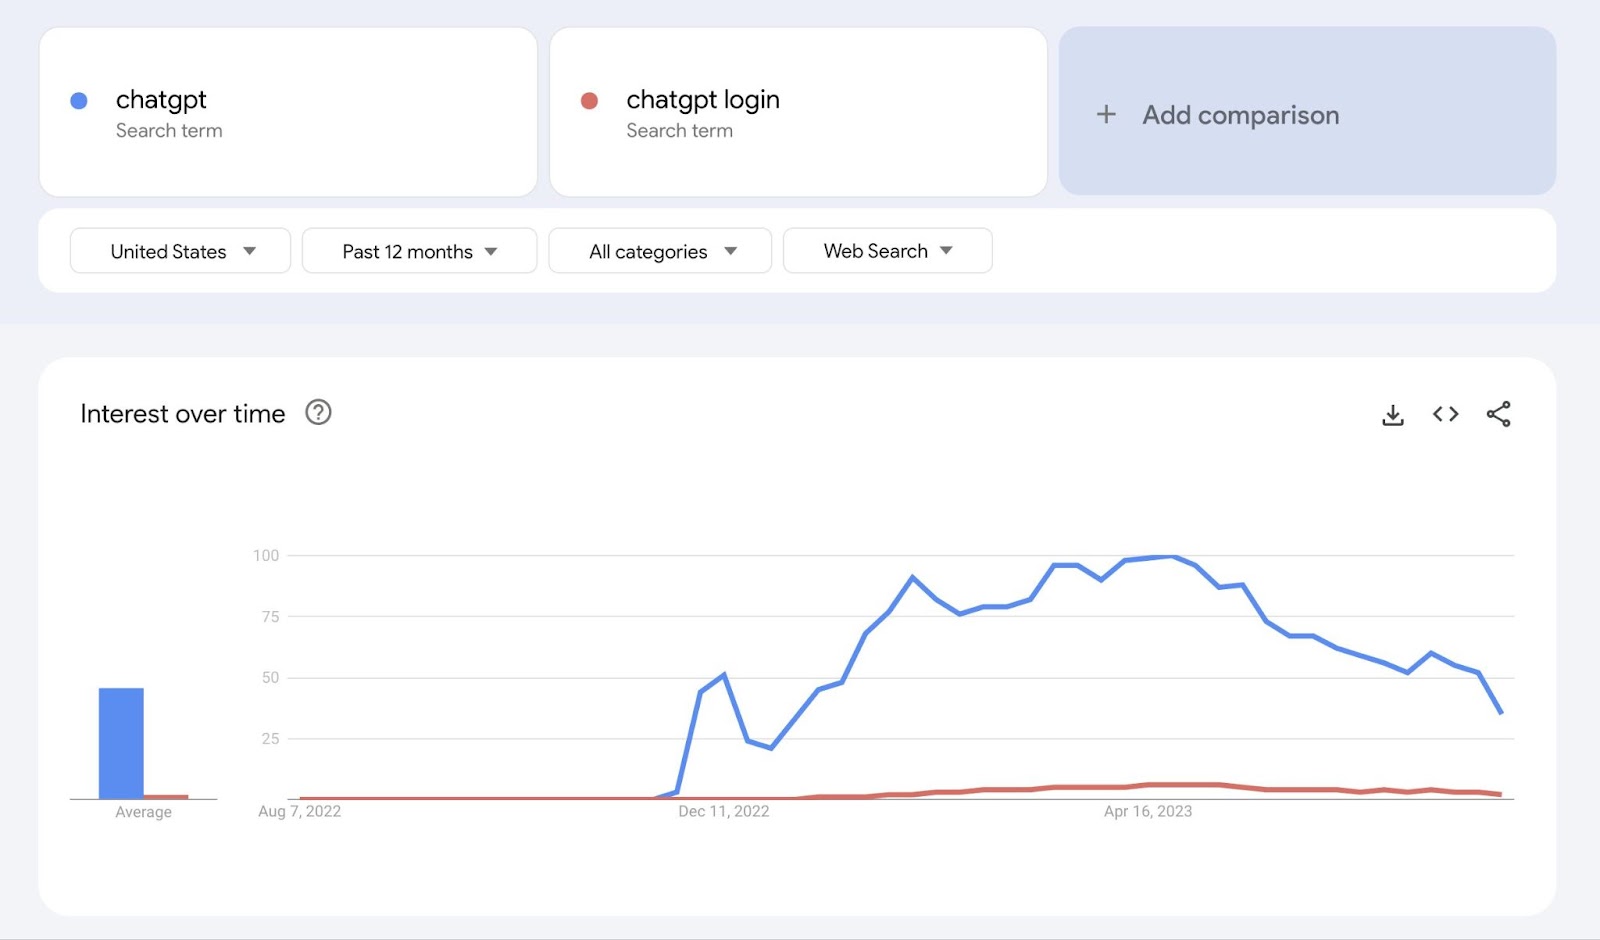 Graph that shows search term use for chatgpt and chatgpt login